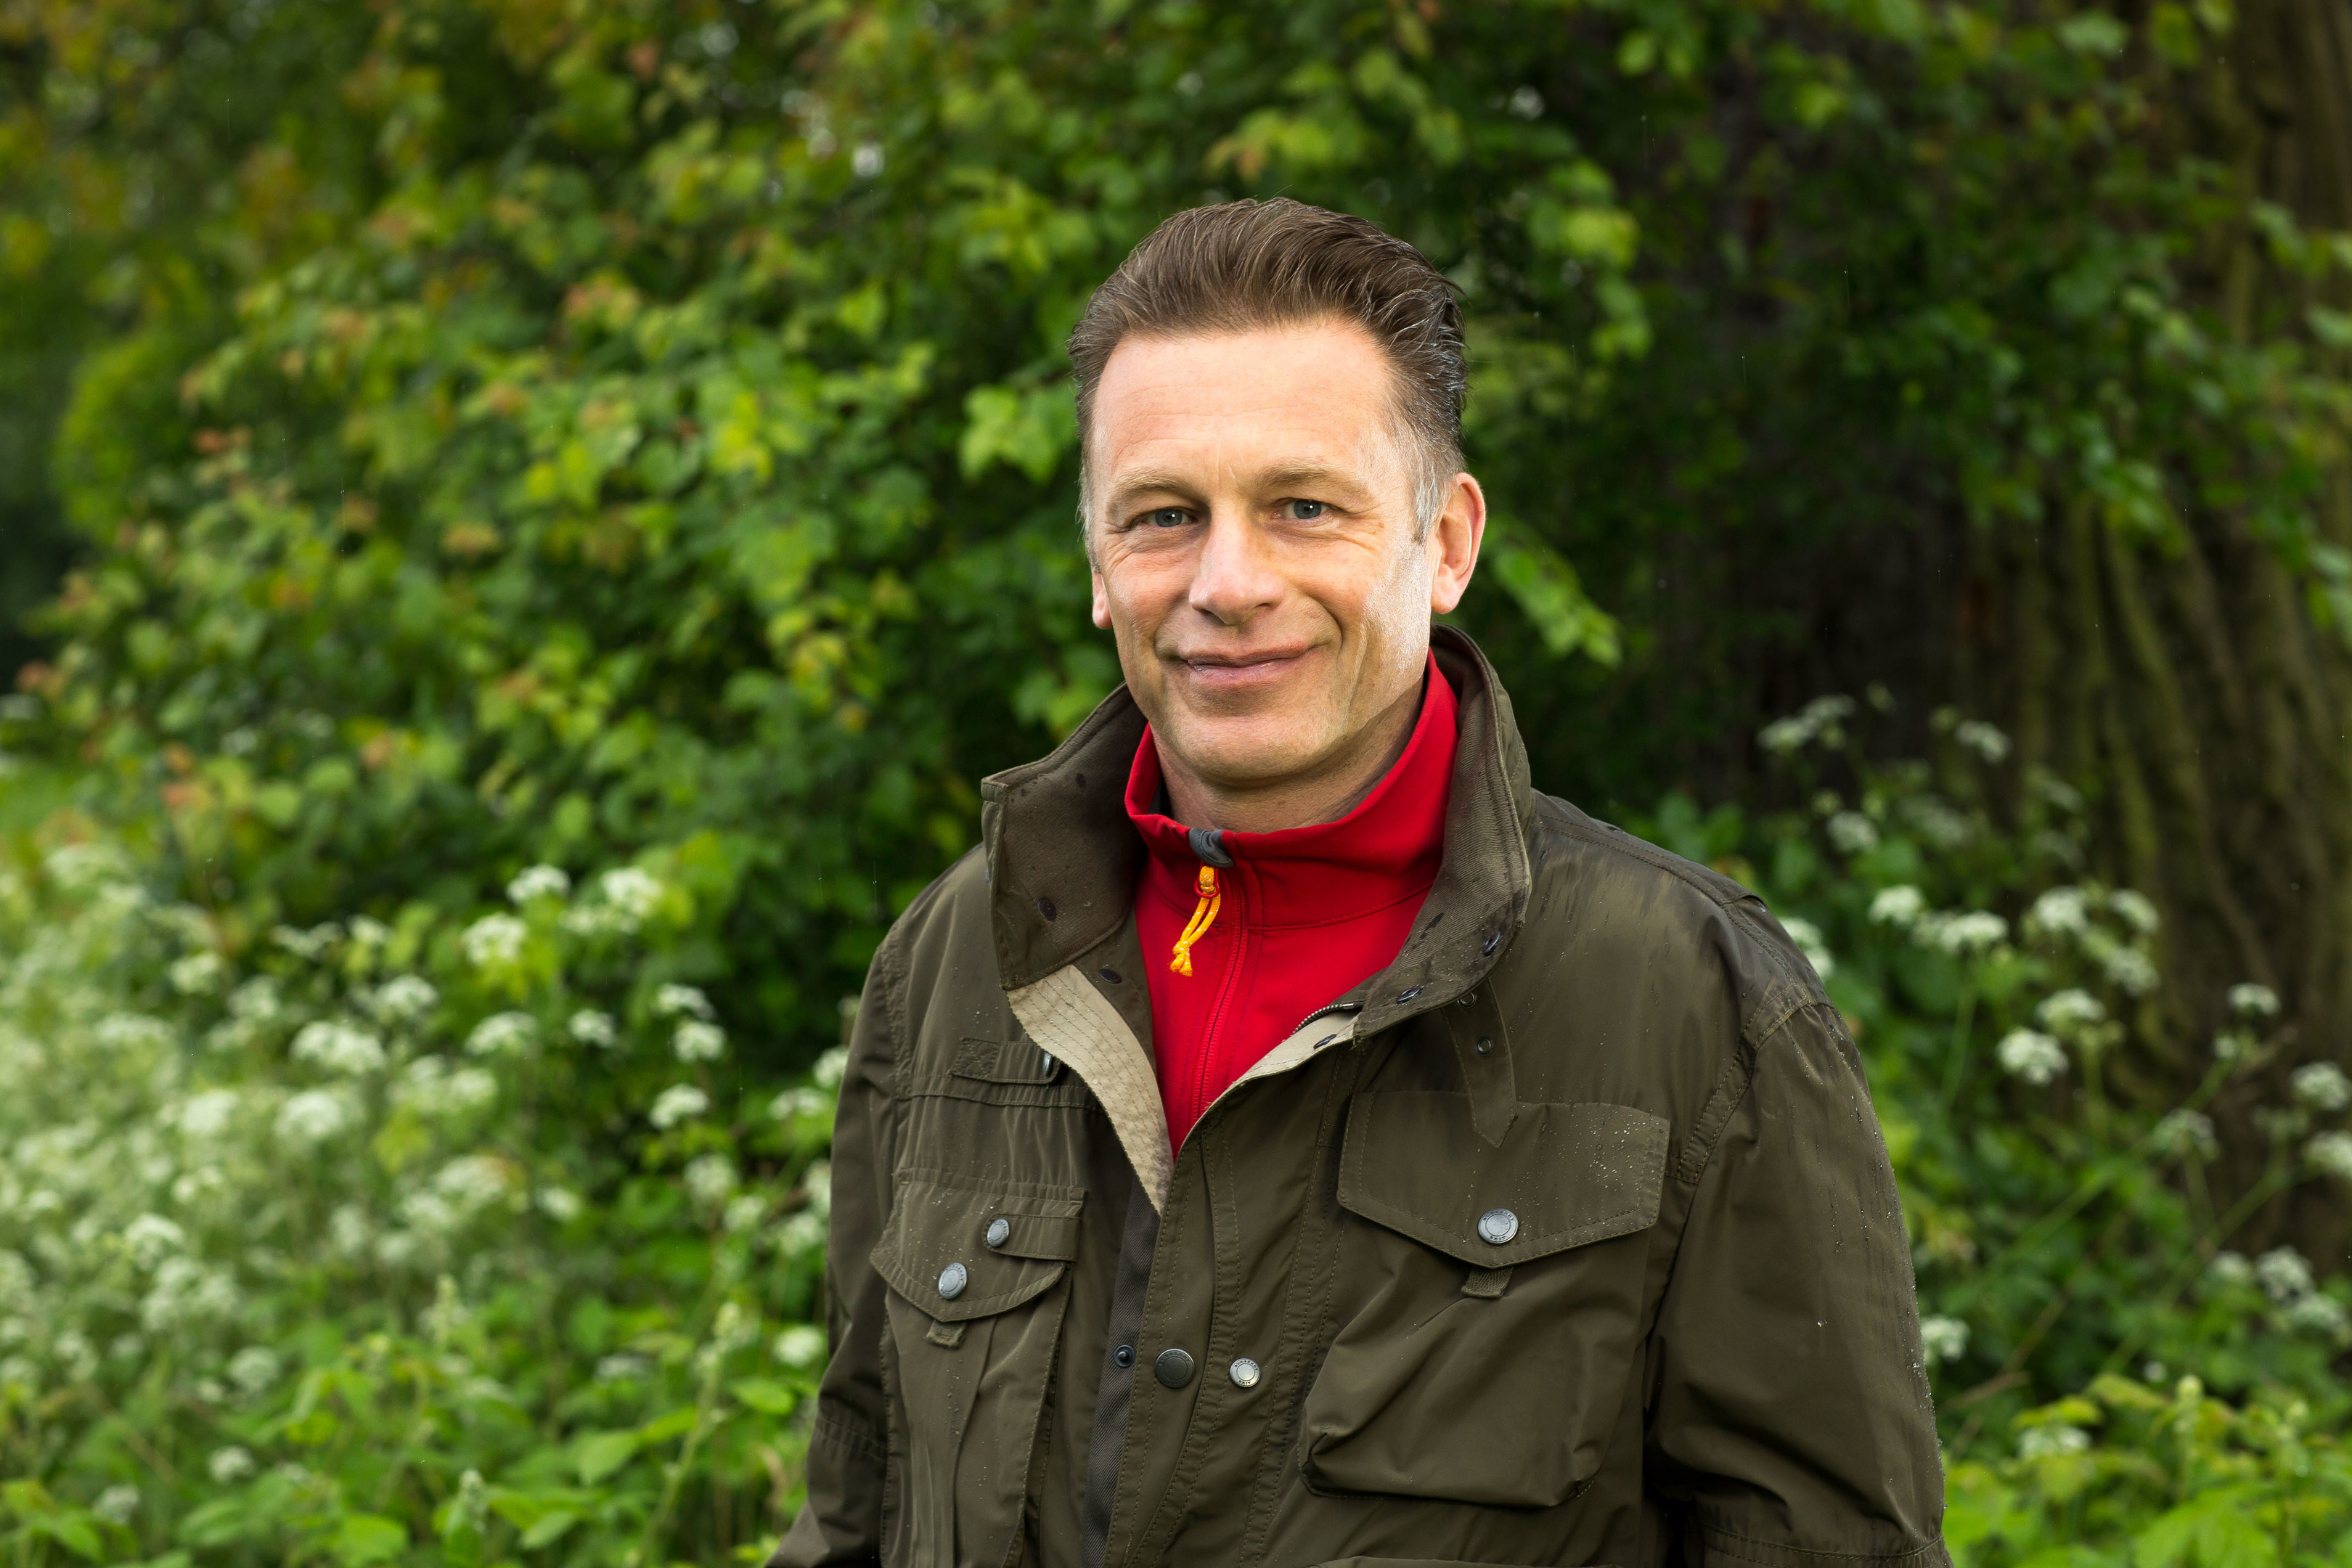 Chris Packham is on a mission to save the UK's wildlife.